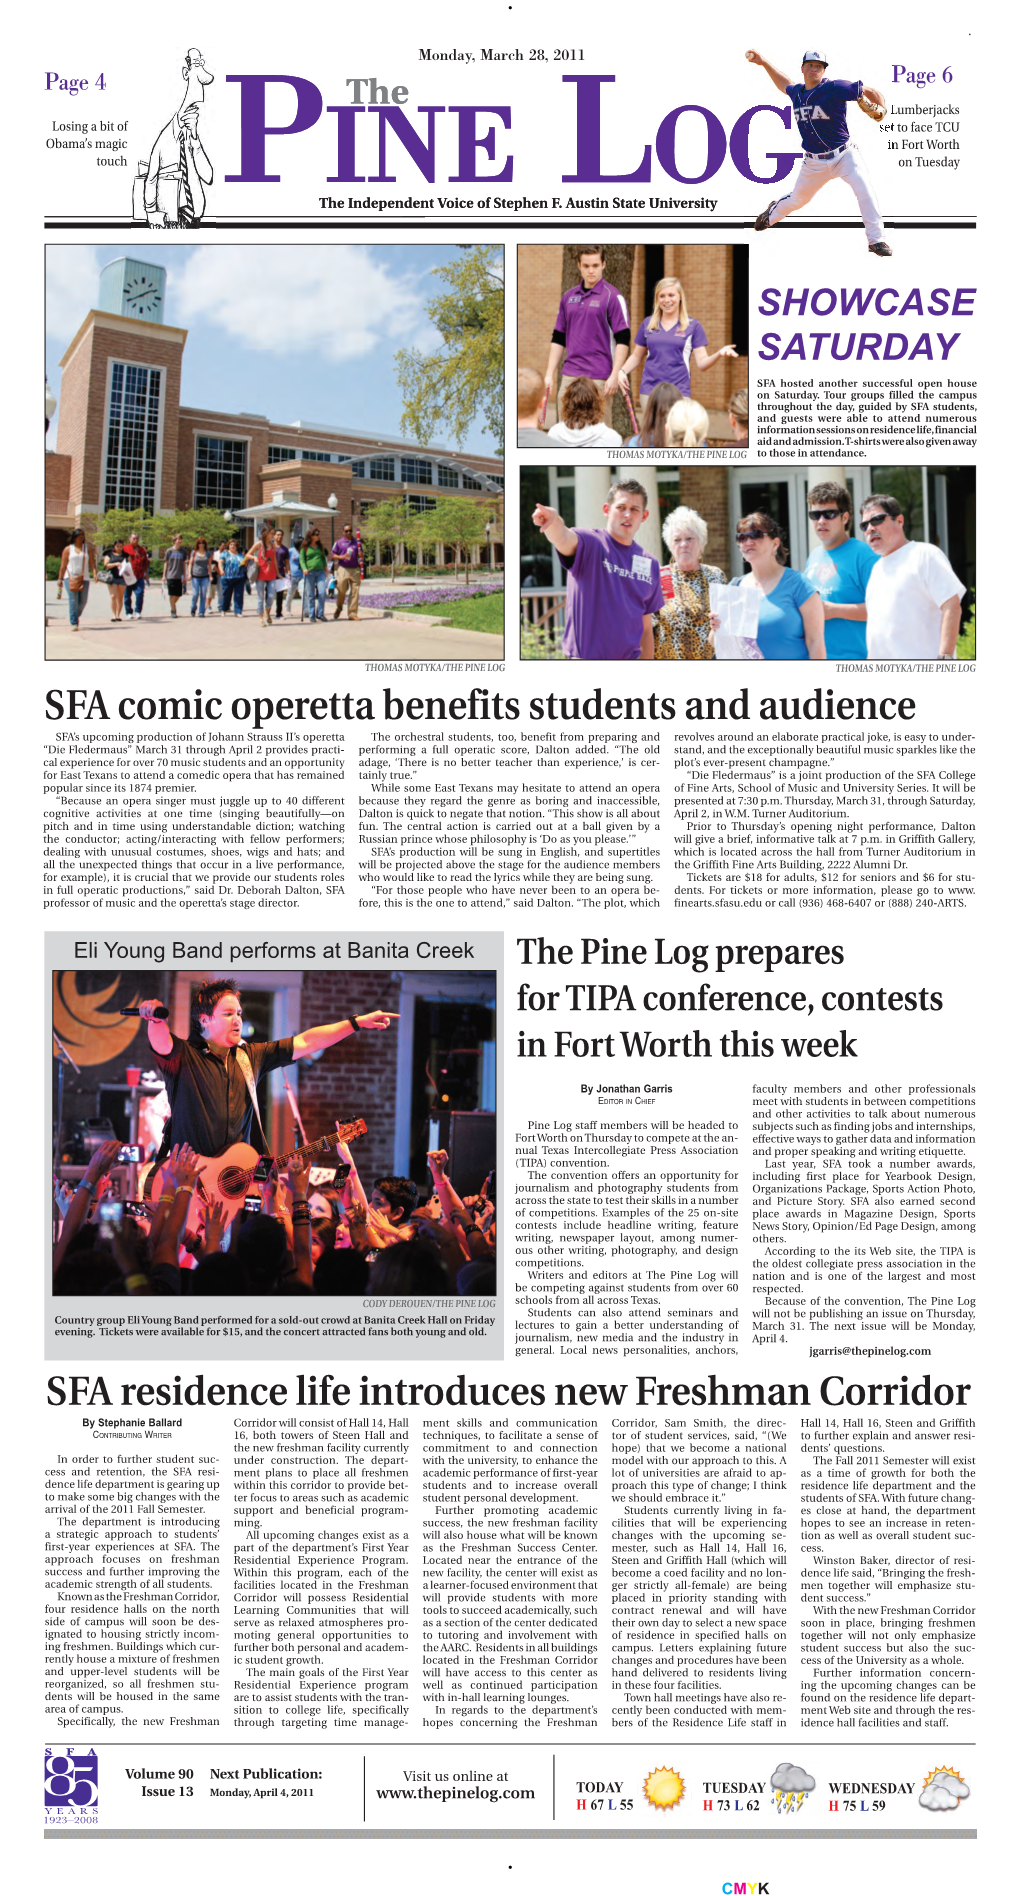 SFA Comic Operetta Benefits Students and Audience